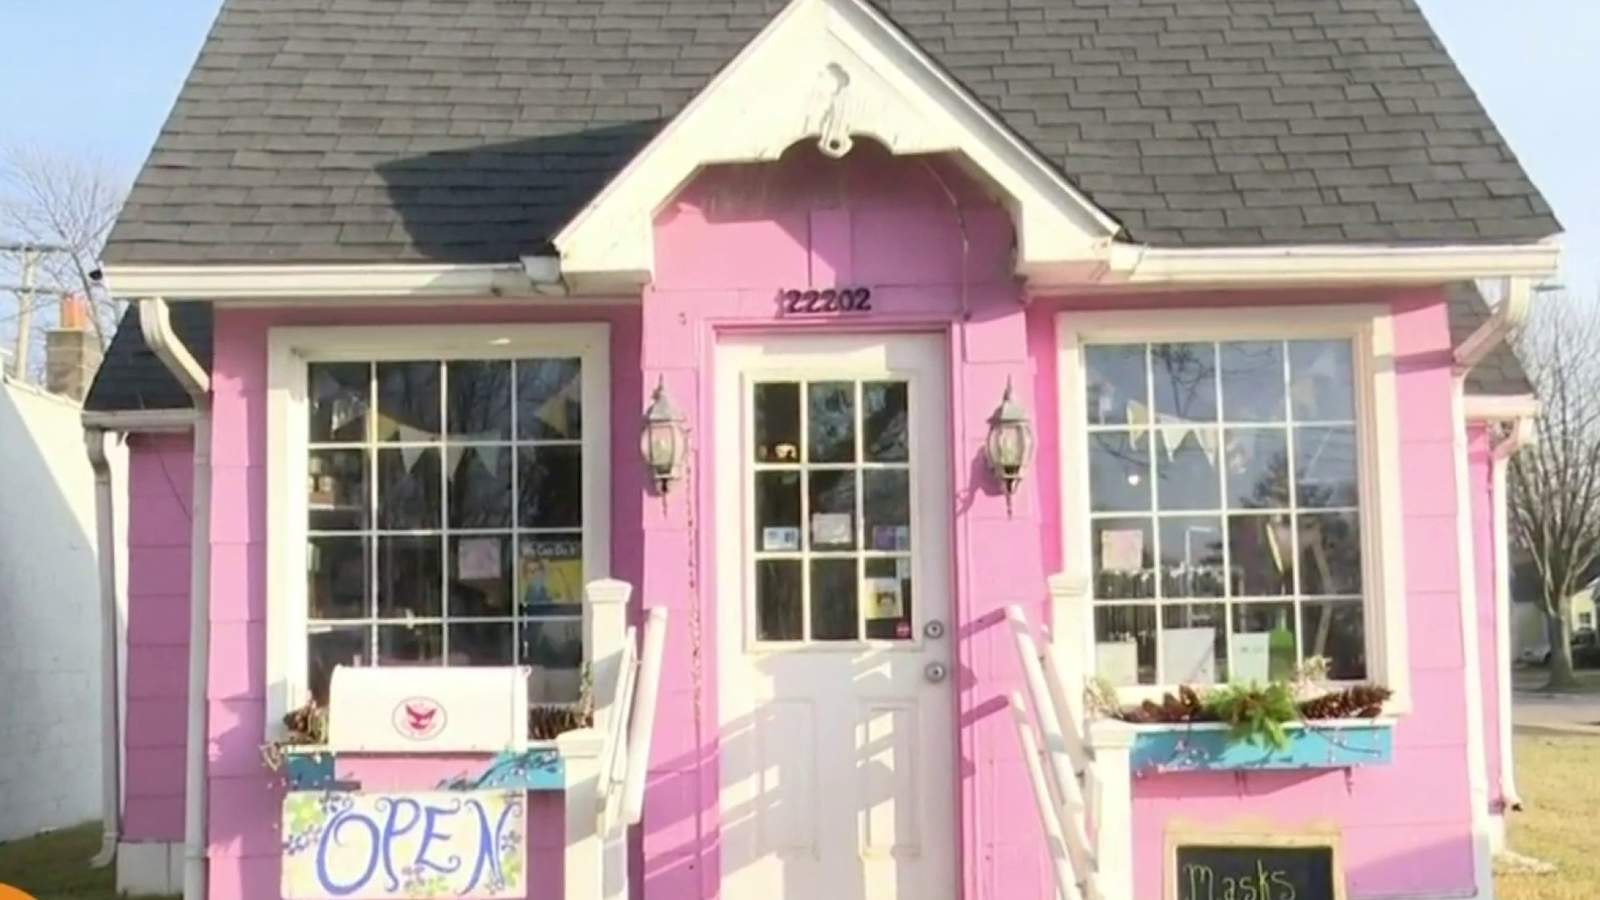 Find fun trinkets and gifts at this cute, colorful store